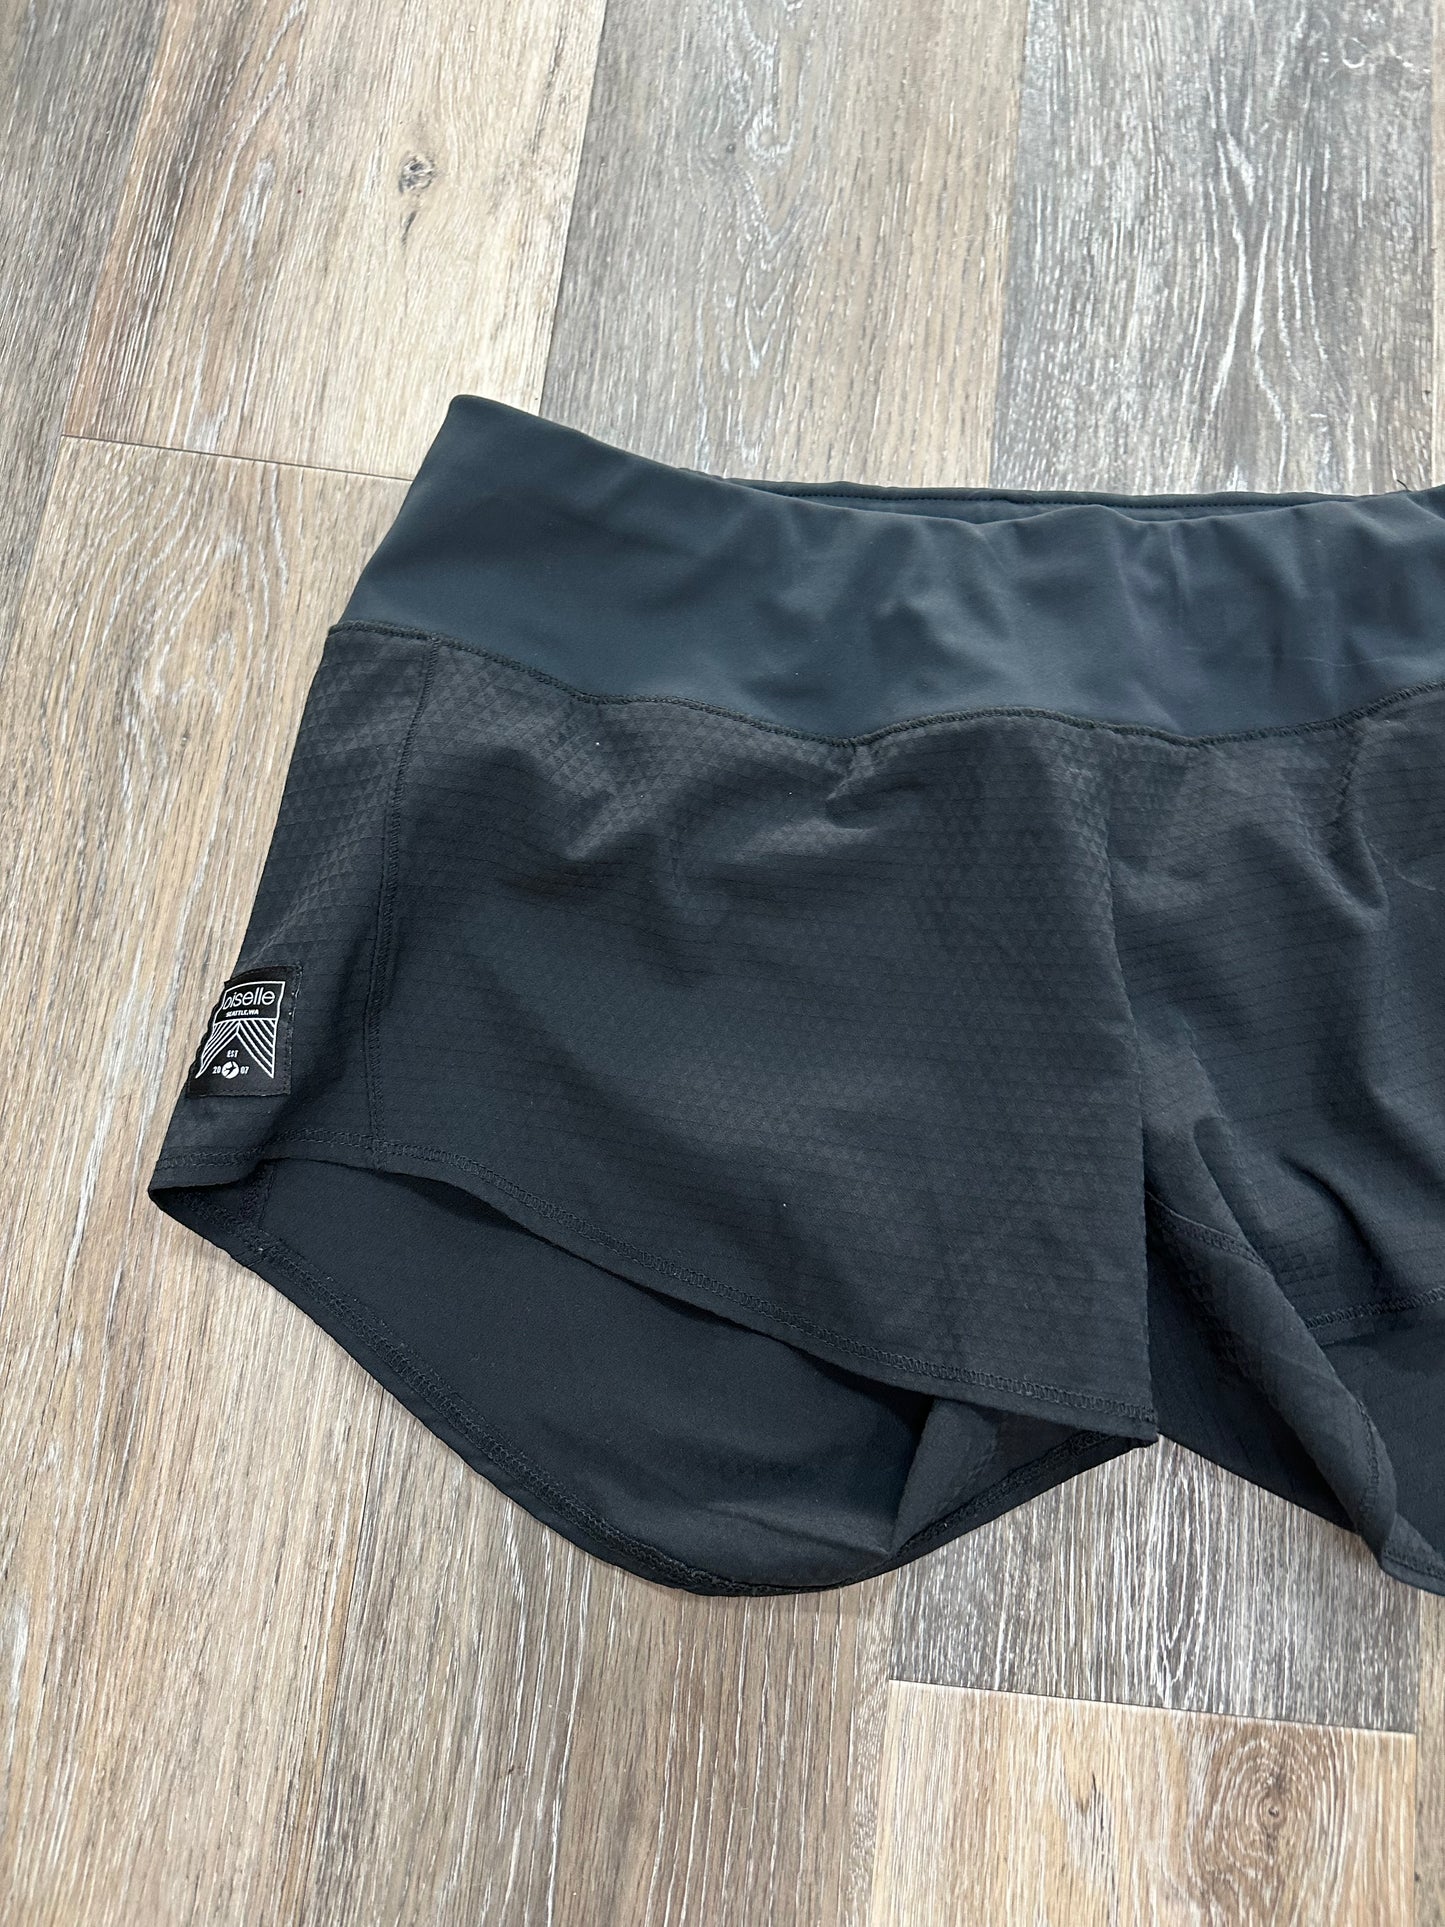 Athletic Shorts By Oiselle  Size: 8